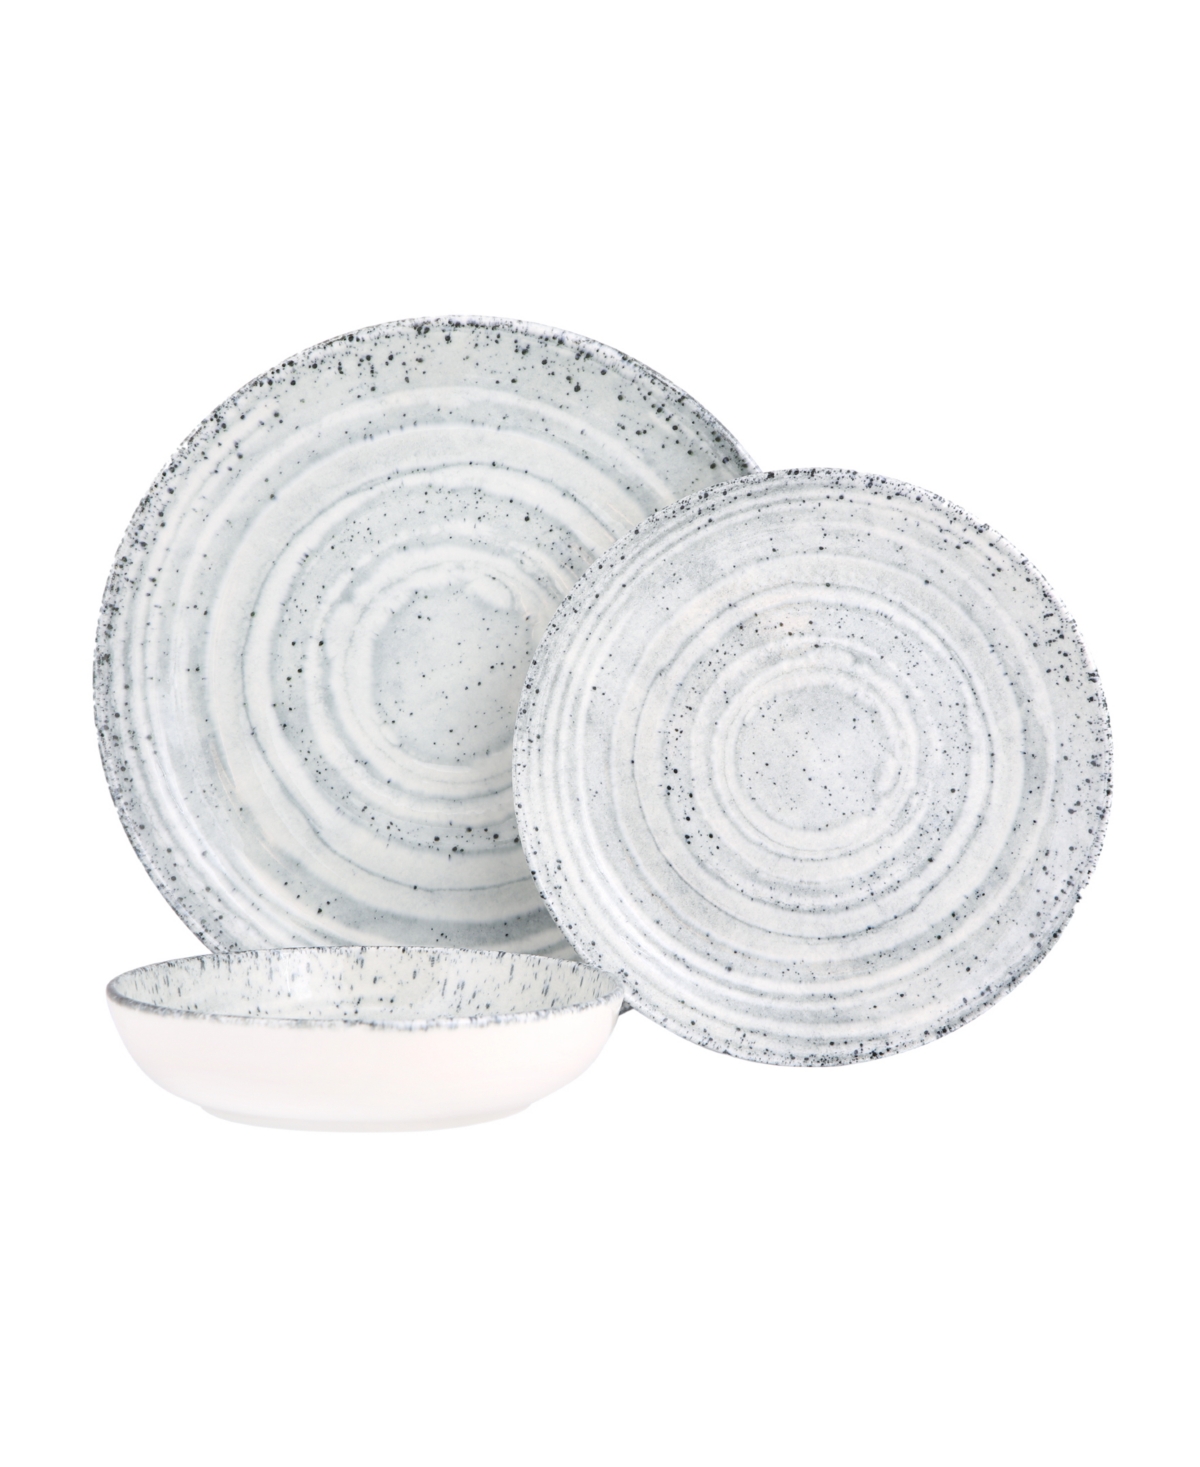 New Age Natura 3-Piece Place Setting Set - Gray and White